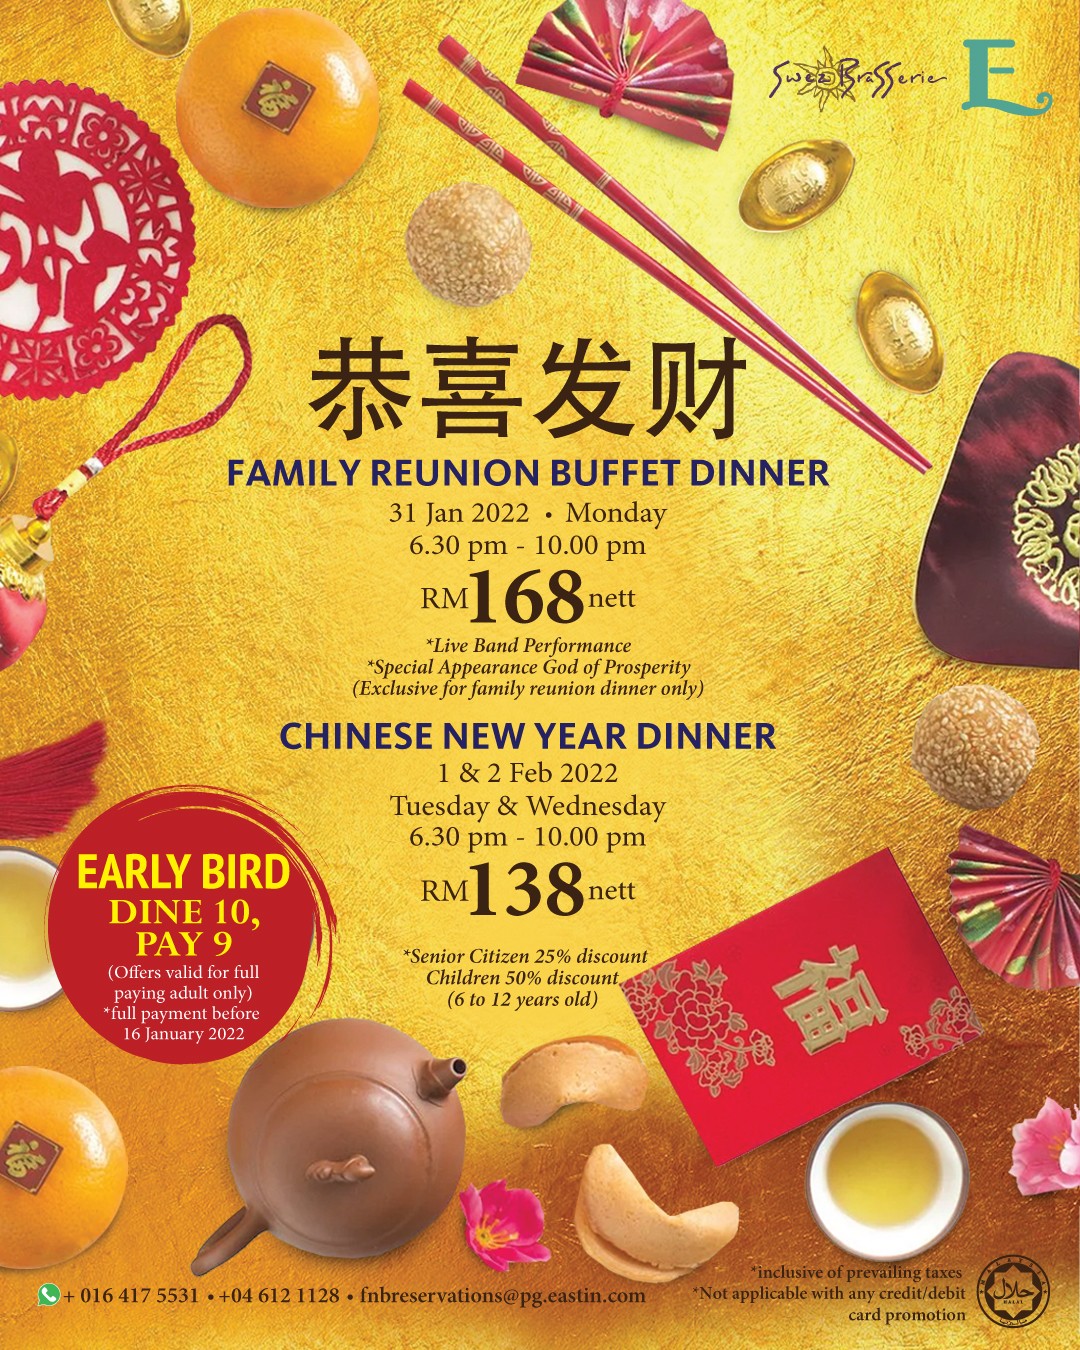 Family Reunion Buffet Dinner  by Eastin Hotel Penang